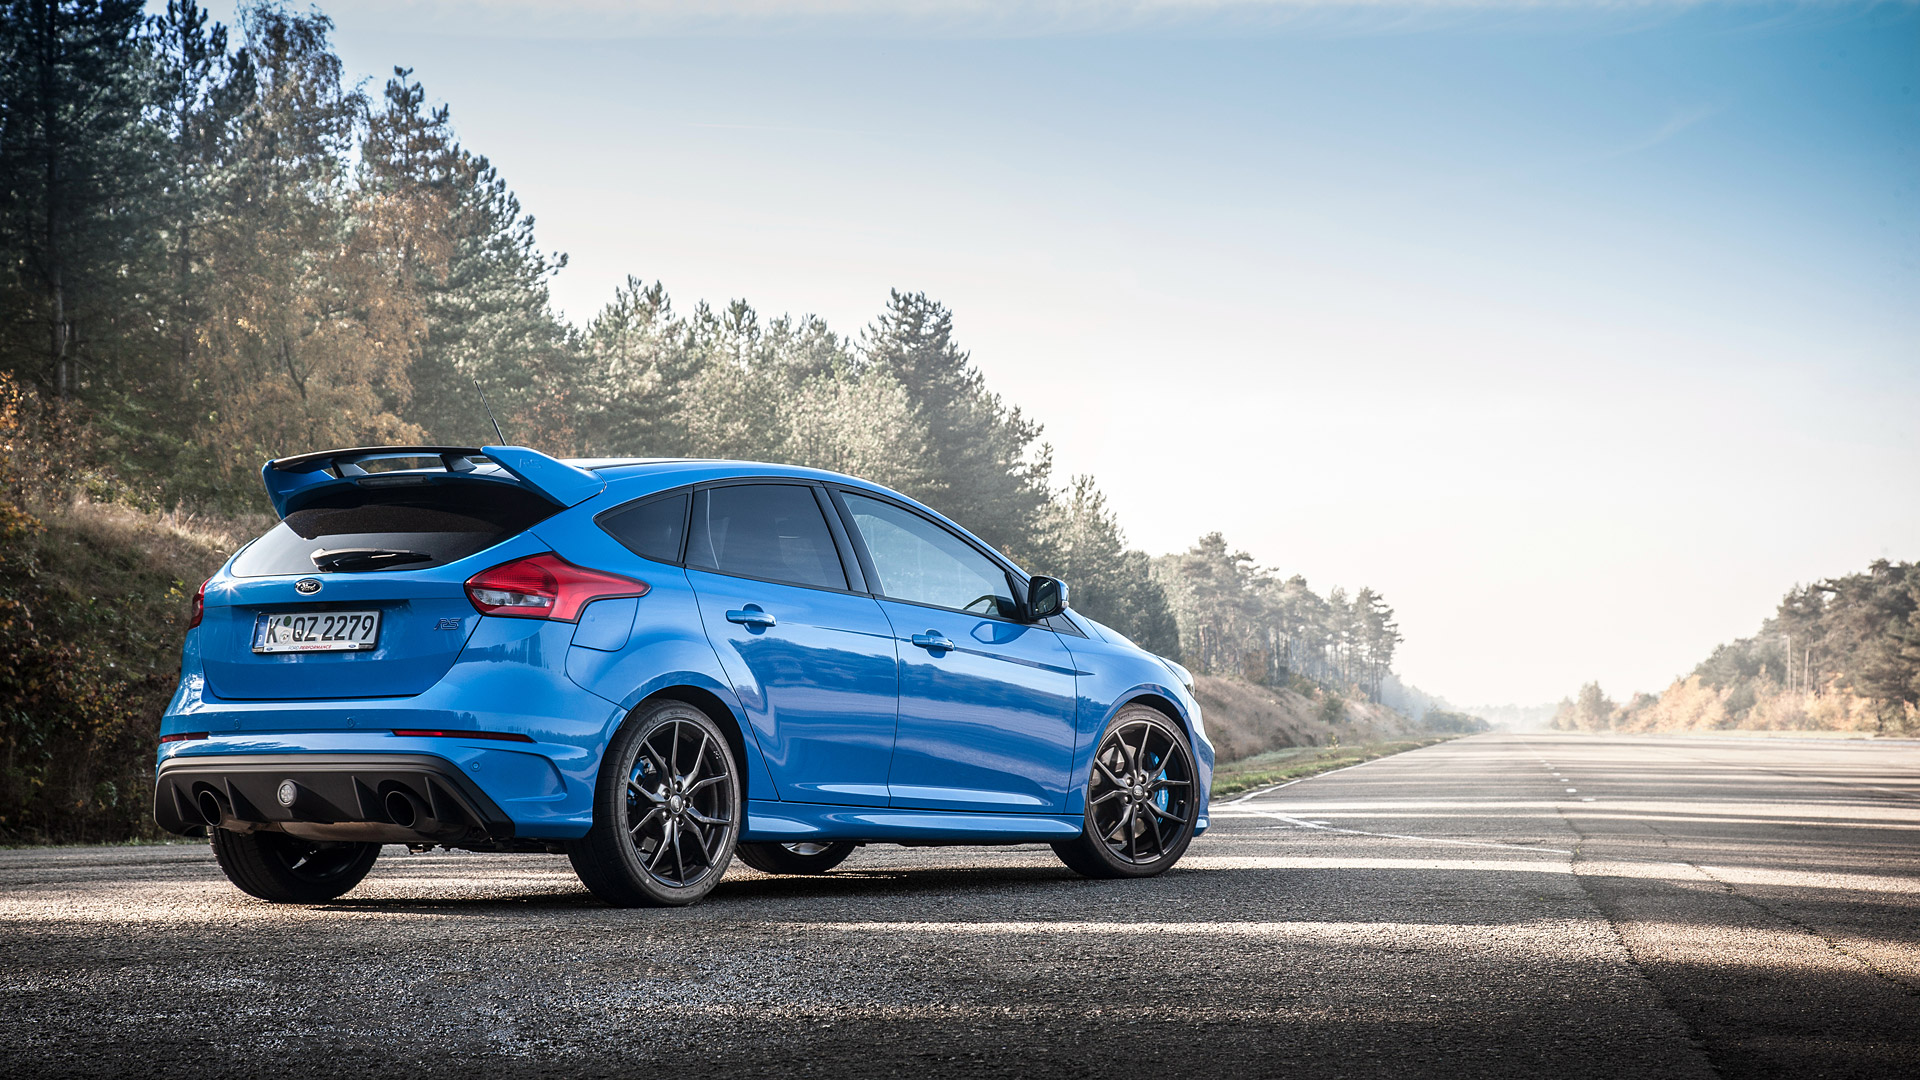 2016 Ford Focus Rs Picture - Ford Focus Rs 2018 , HD Wallpaper & Backgrounds